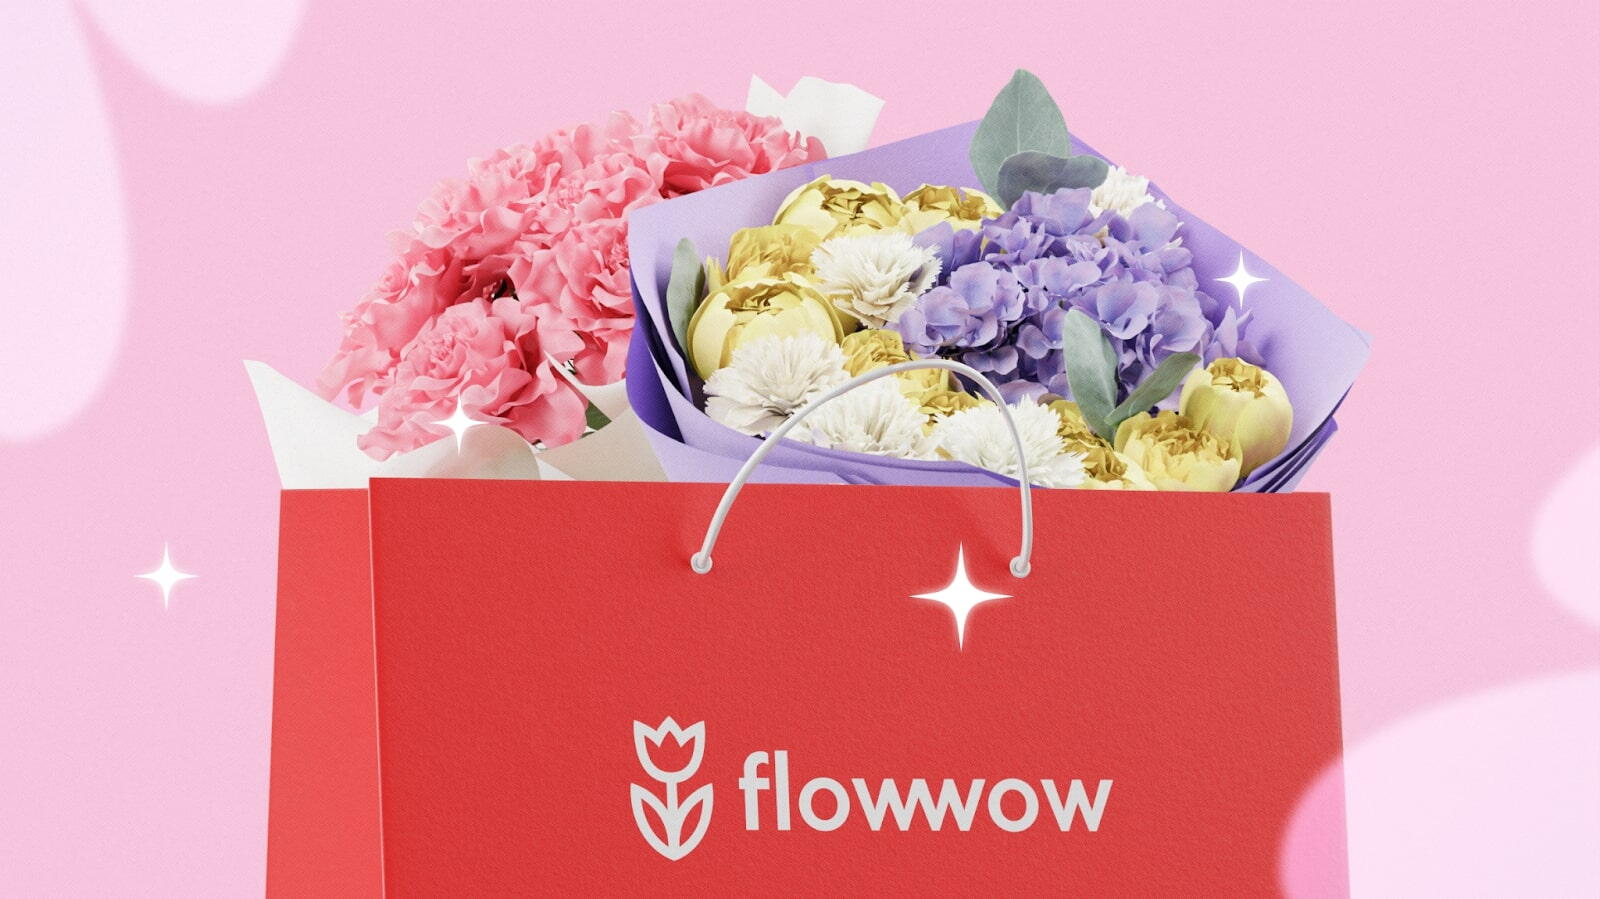 Flower Delivery with Flowwow